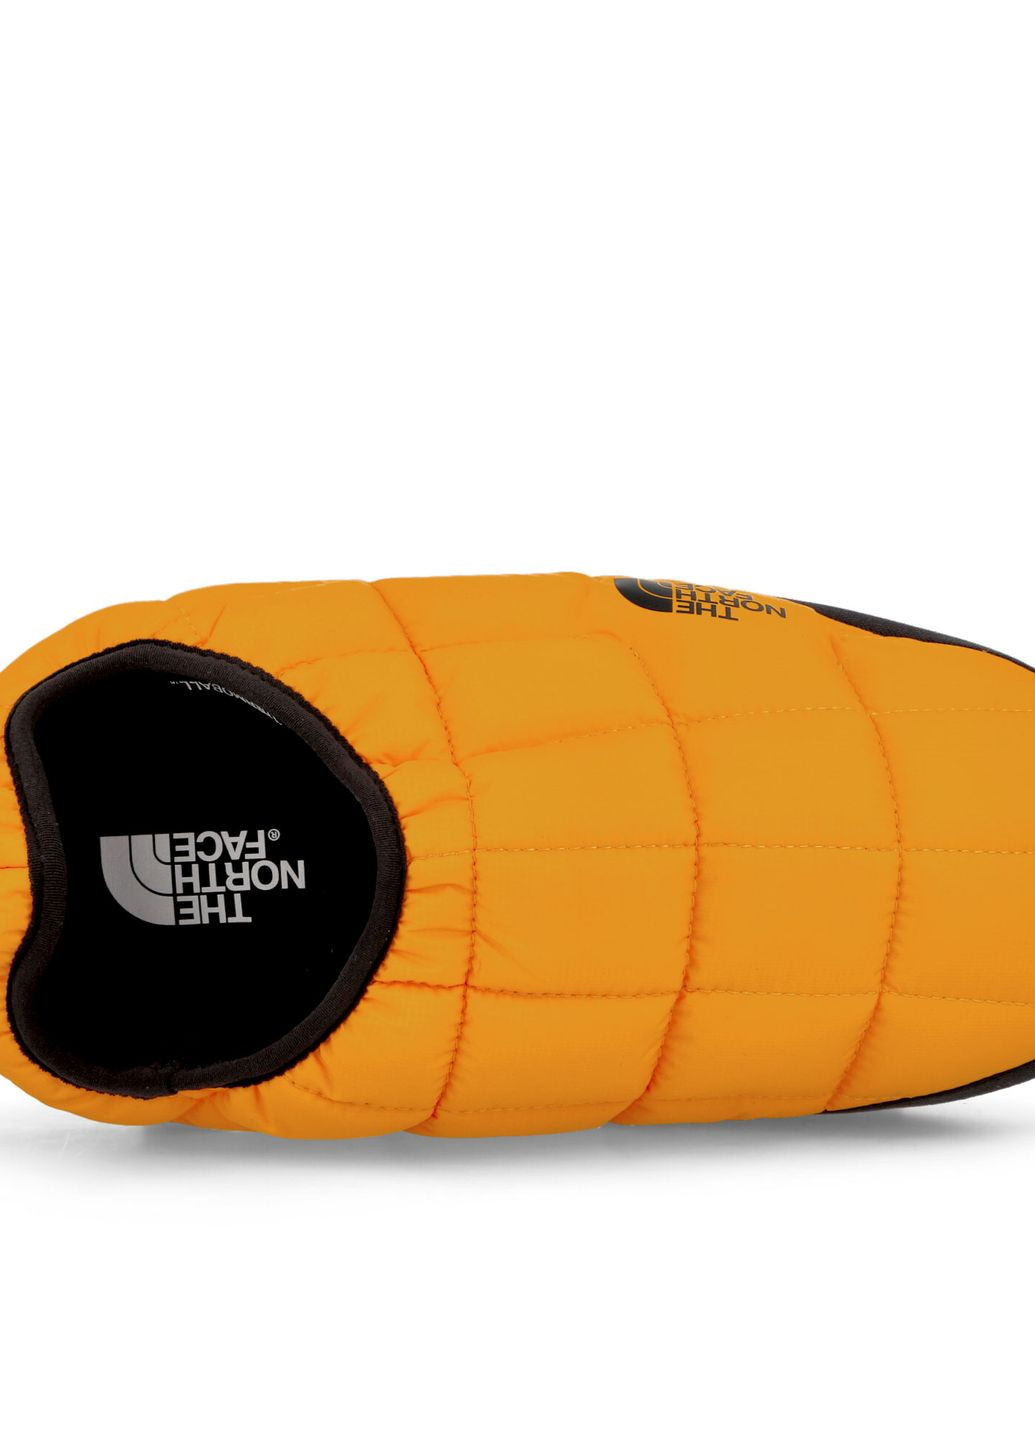 Тапки мулі The North Face thermoball ™ tent mule v (277161510)